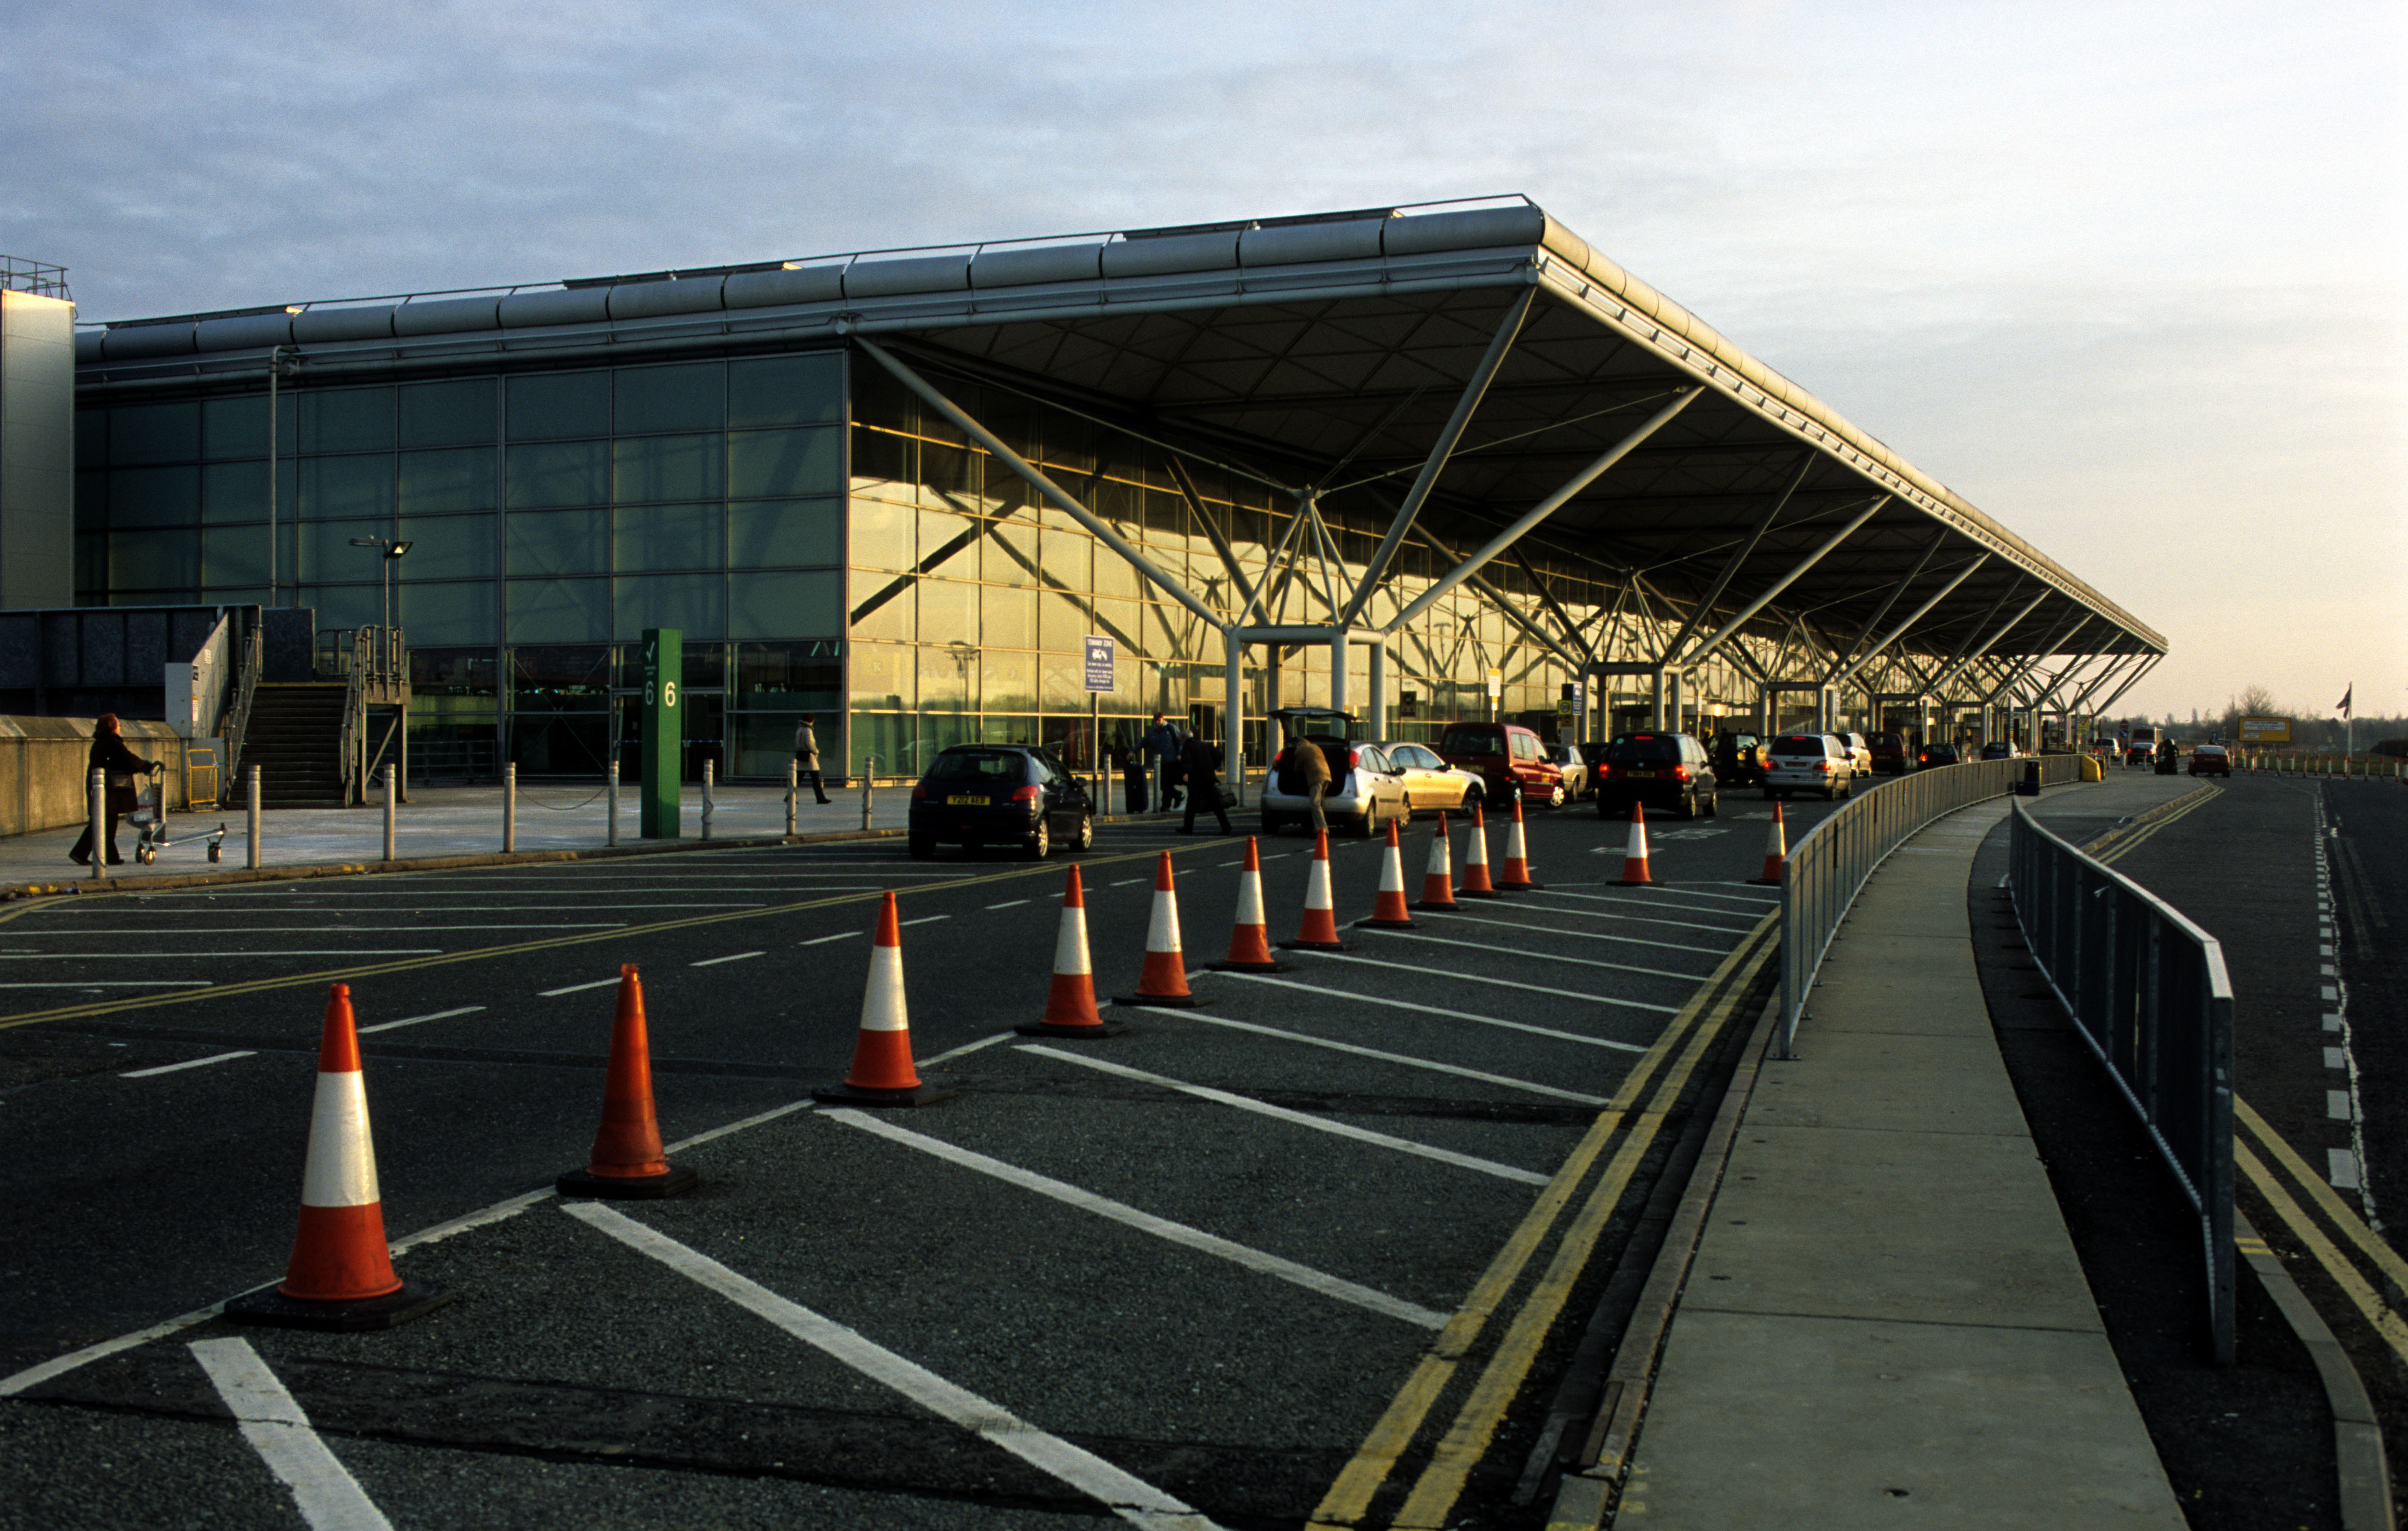 Stansted Airport's terminal